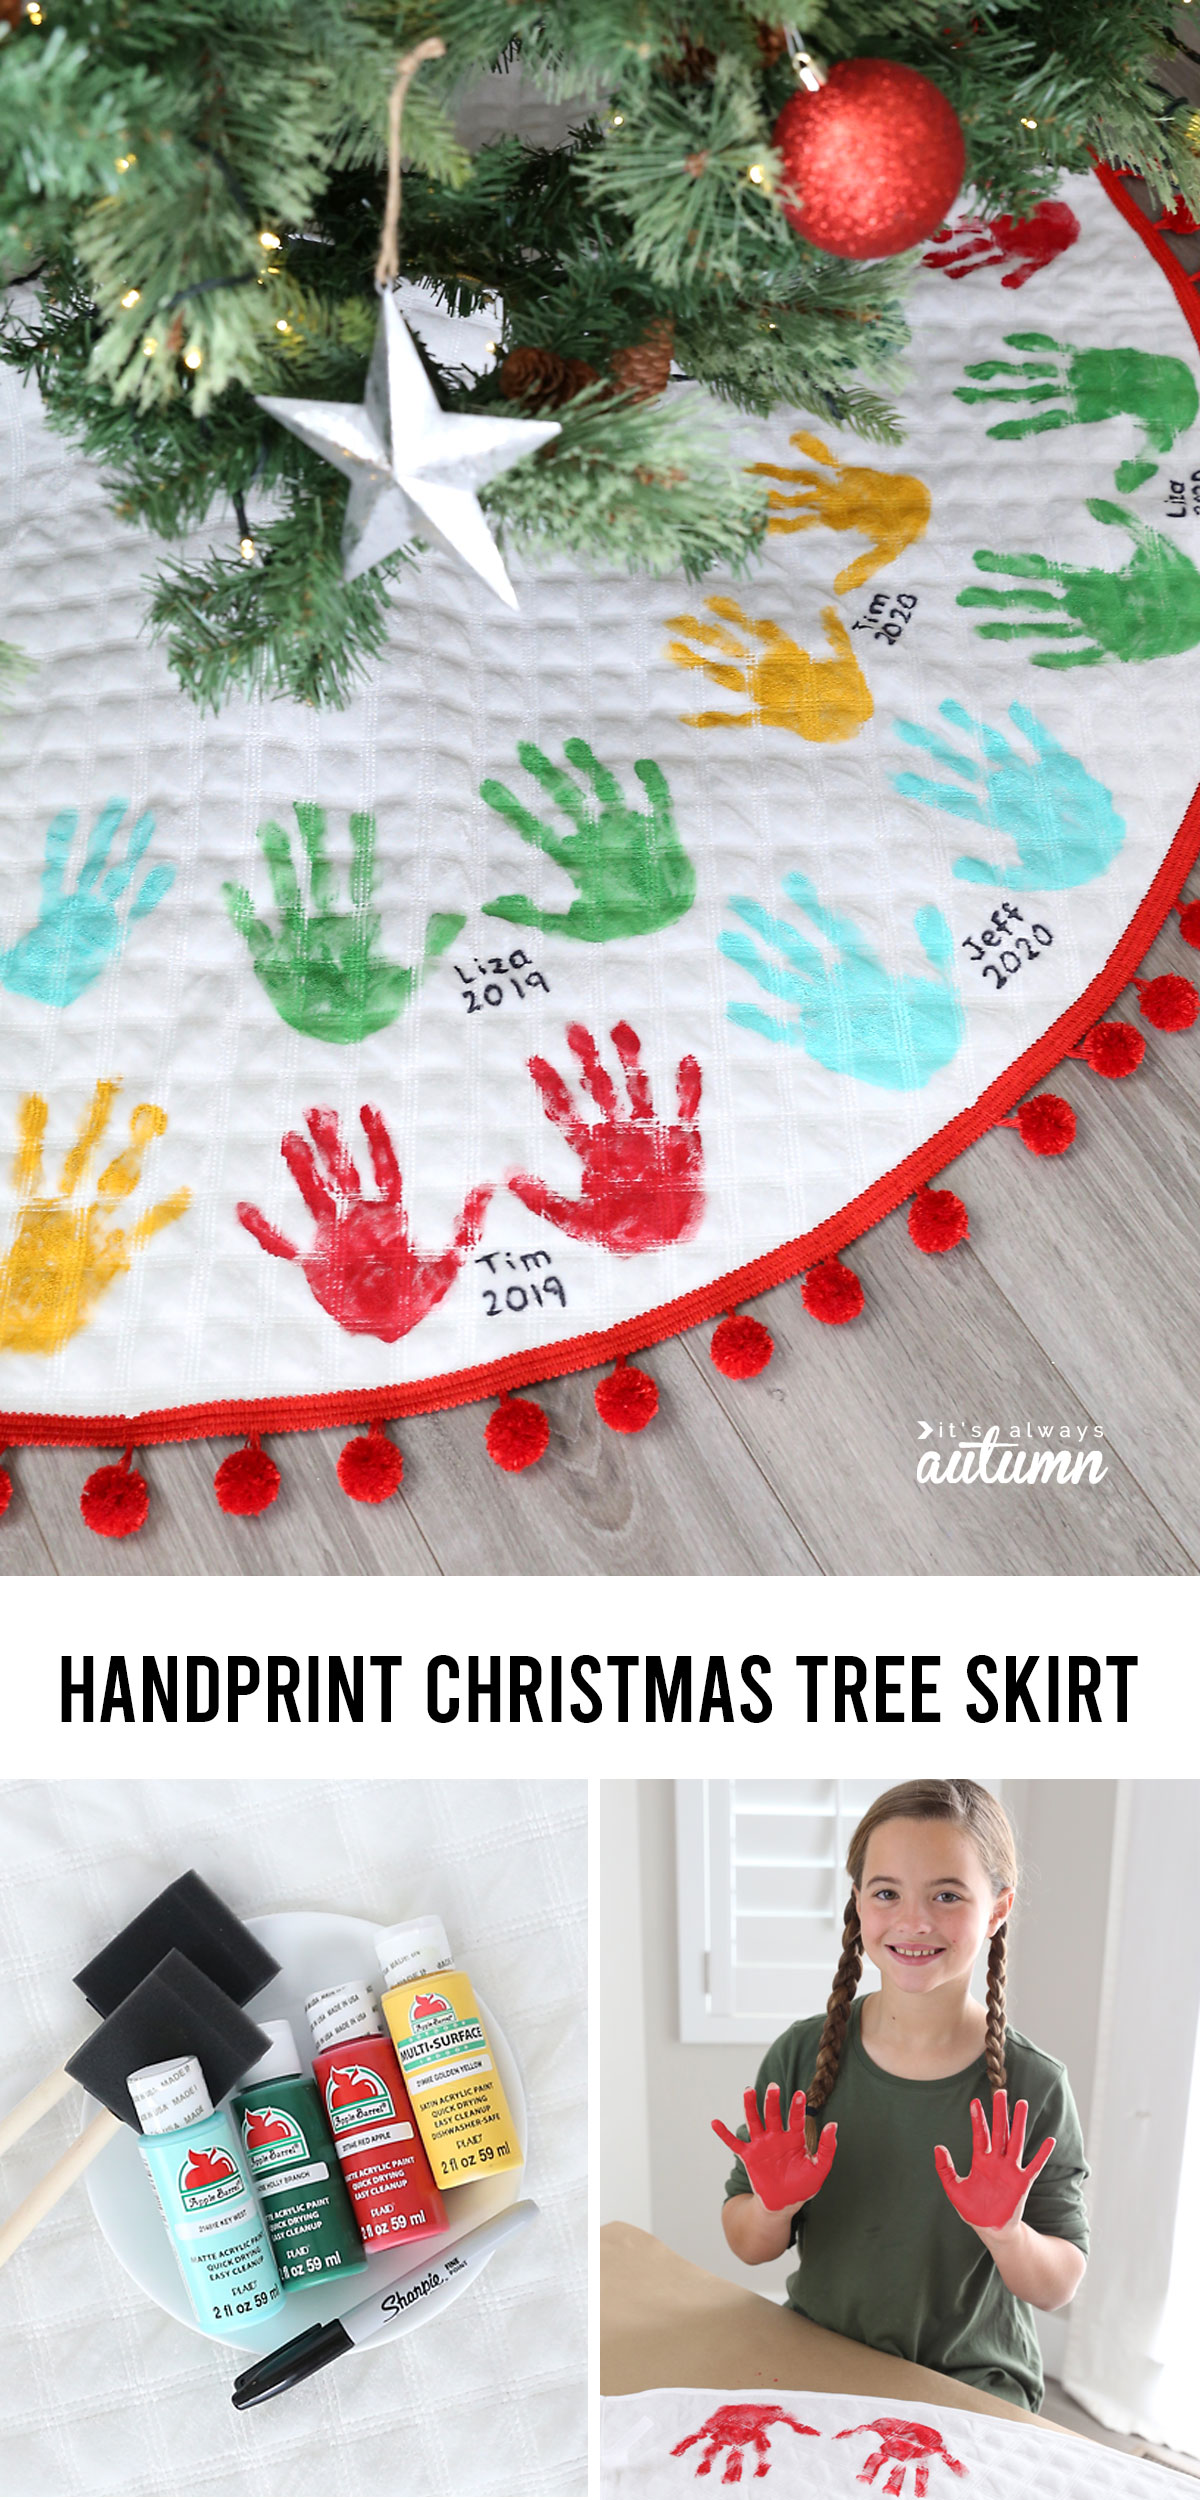 You can make this adorable handprint Christmas tree skirt and add to it every year!